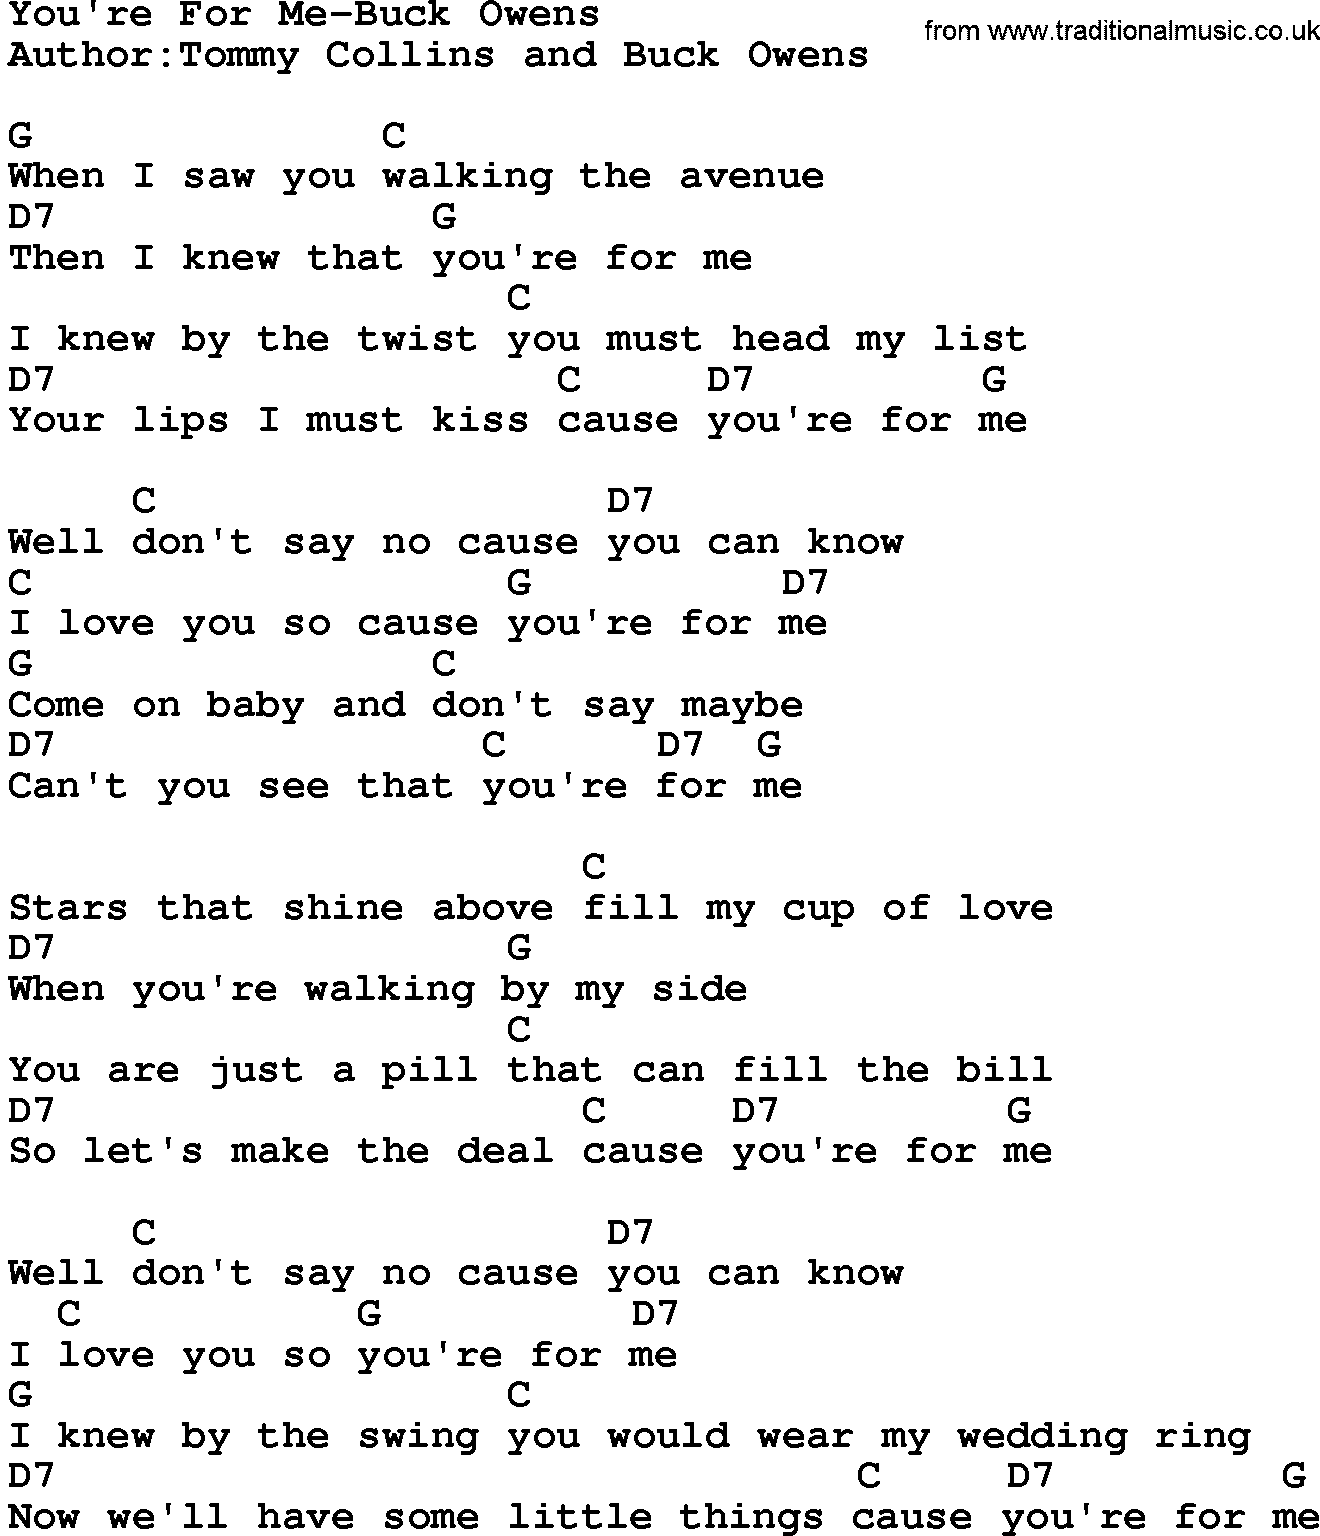 Country music song: You're For Me-Buck Owens lyrics and chords